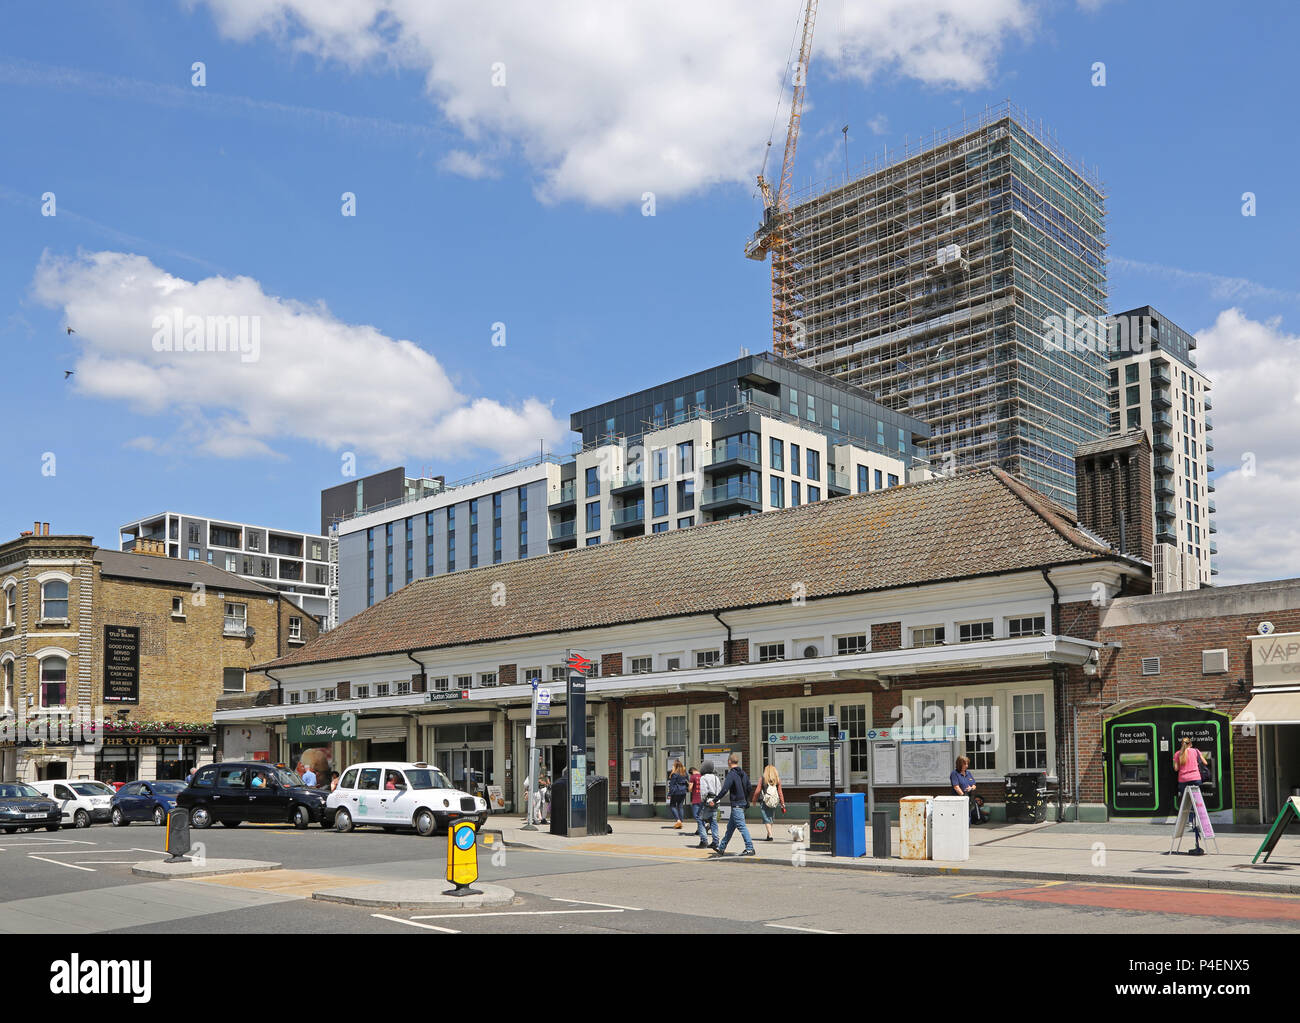 Exterior view of Sutton Station in South London, UK. Traditional Victorian station building spans the lines below. Shows main entrance and taxi rank. Stock Photo